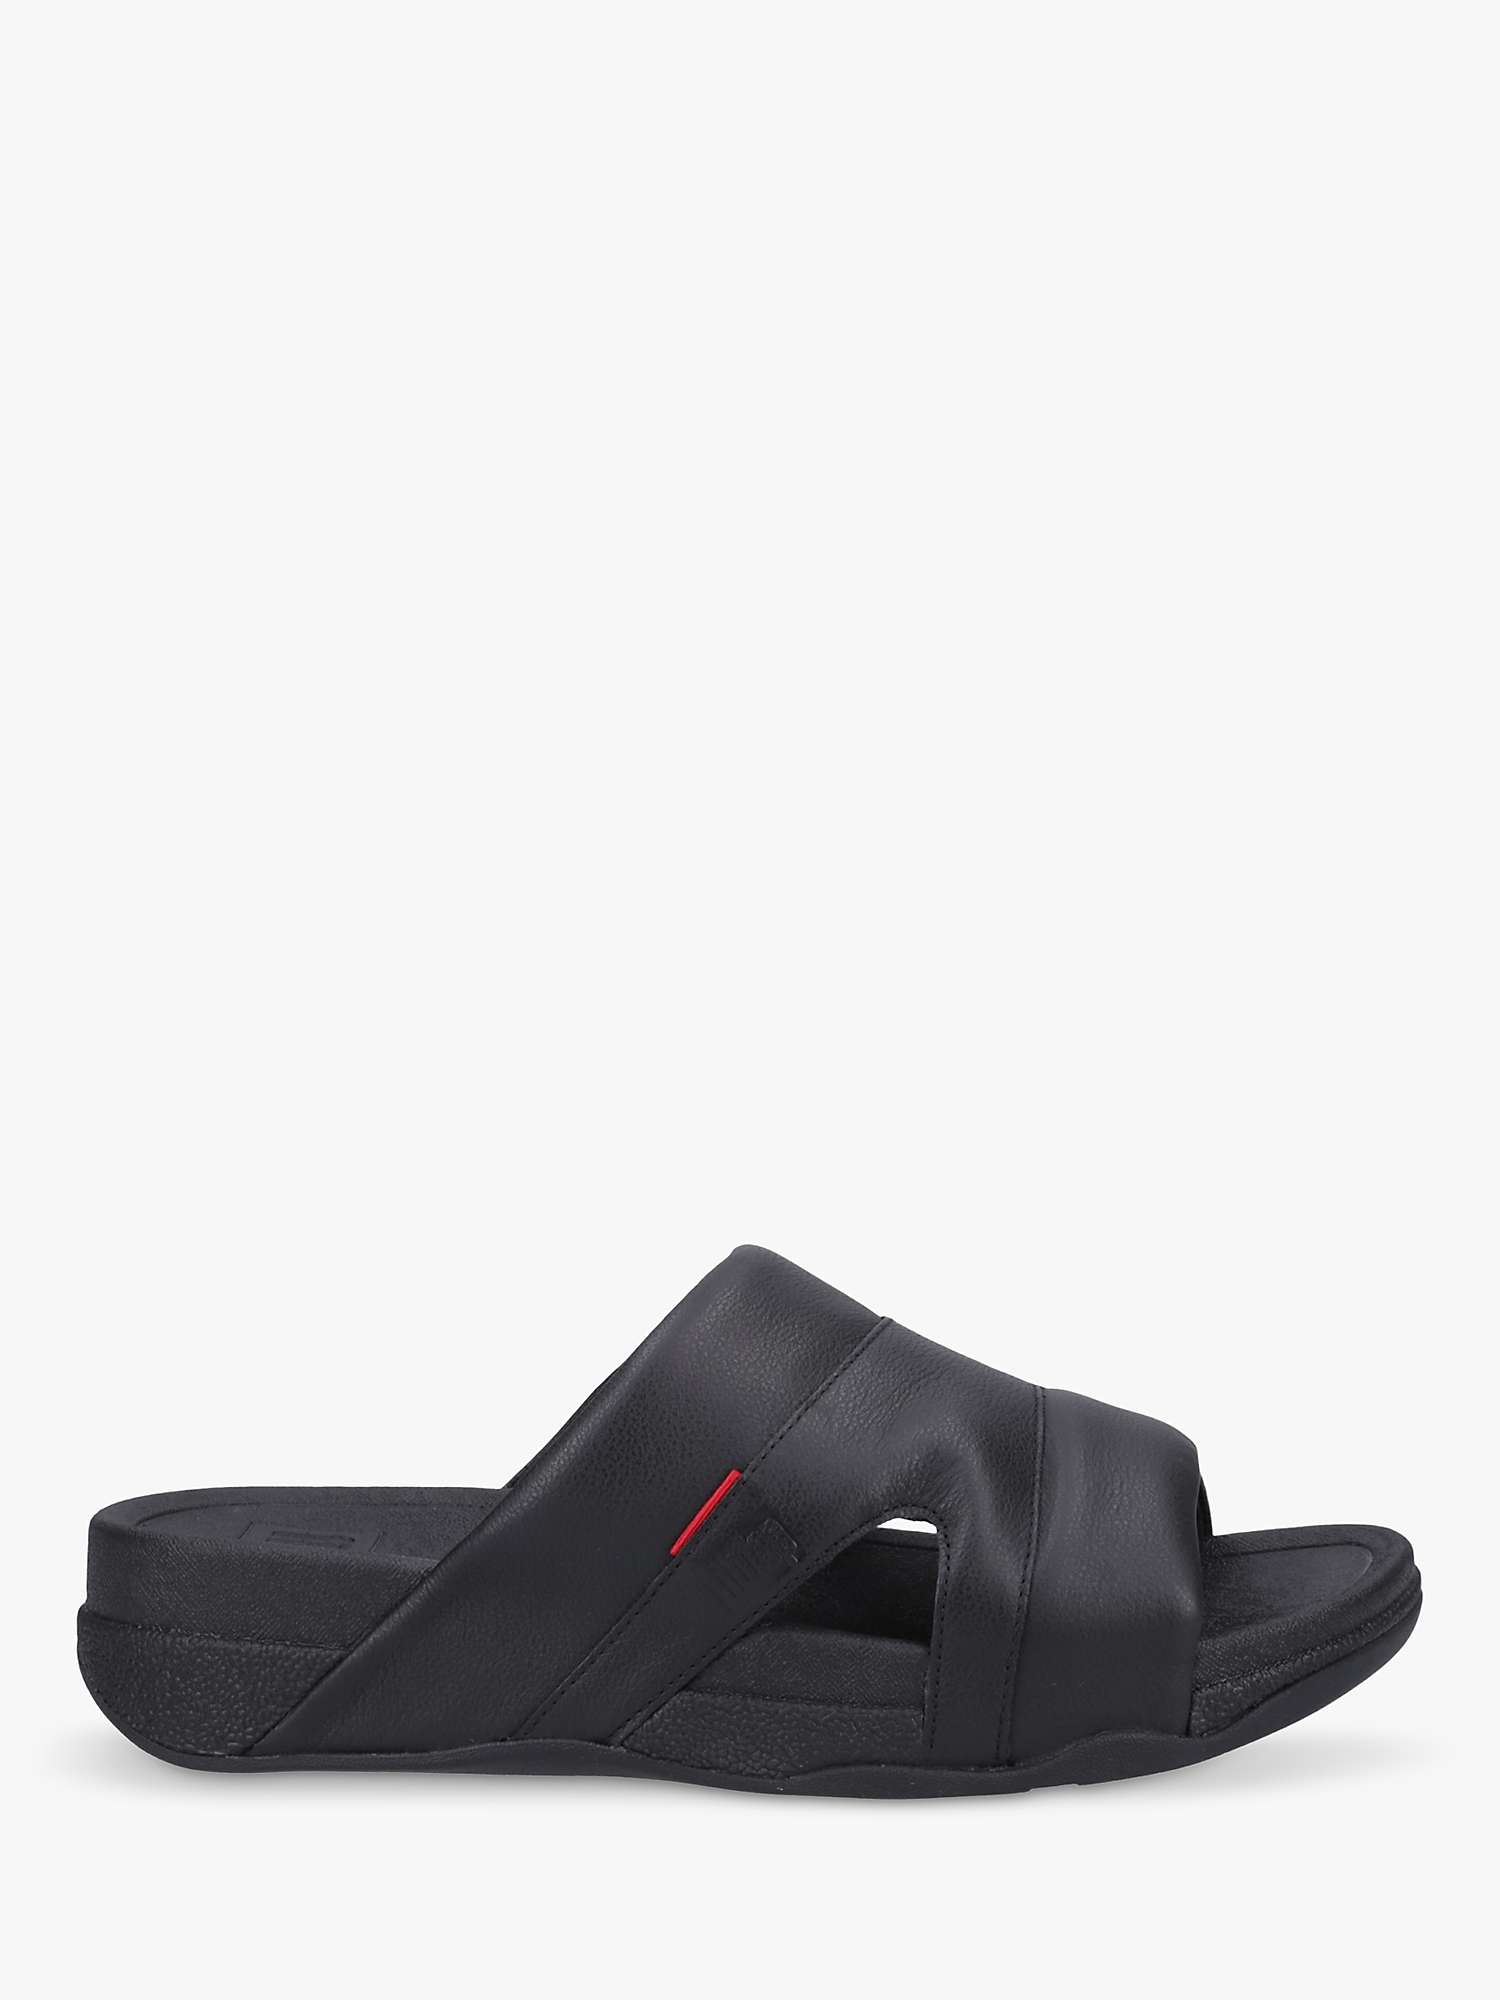 Buy FitFlop Freeway Leather Sliders Online at johnlewis.com